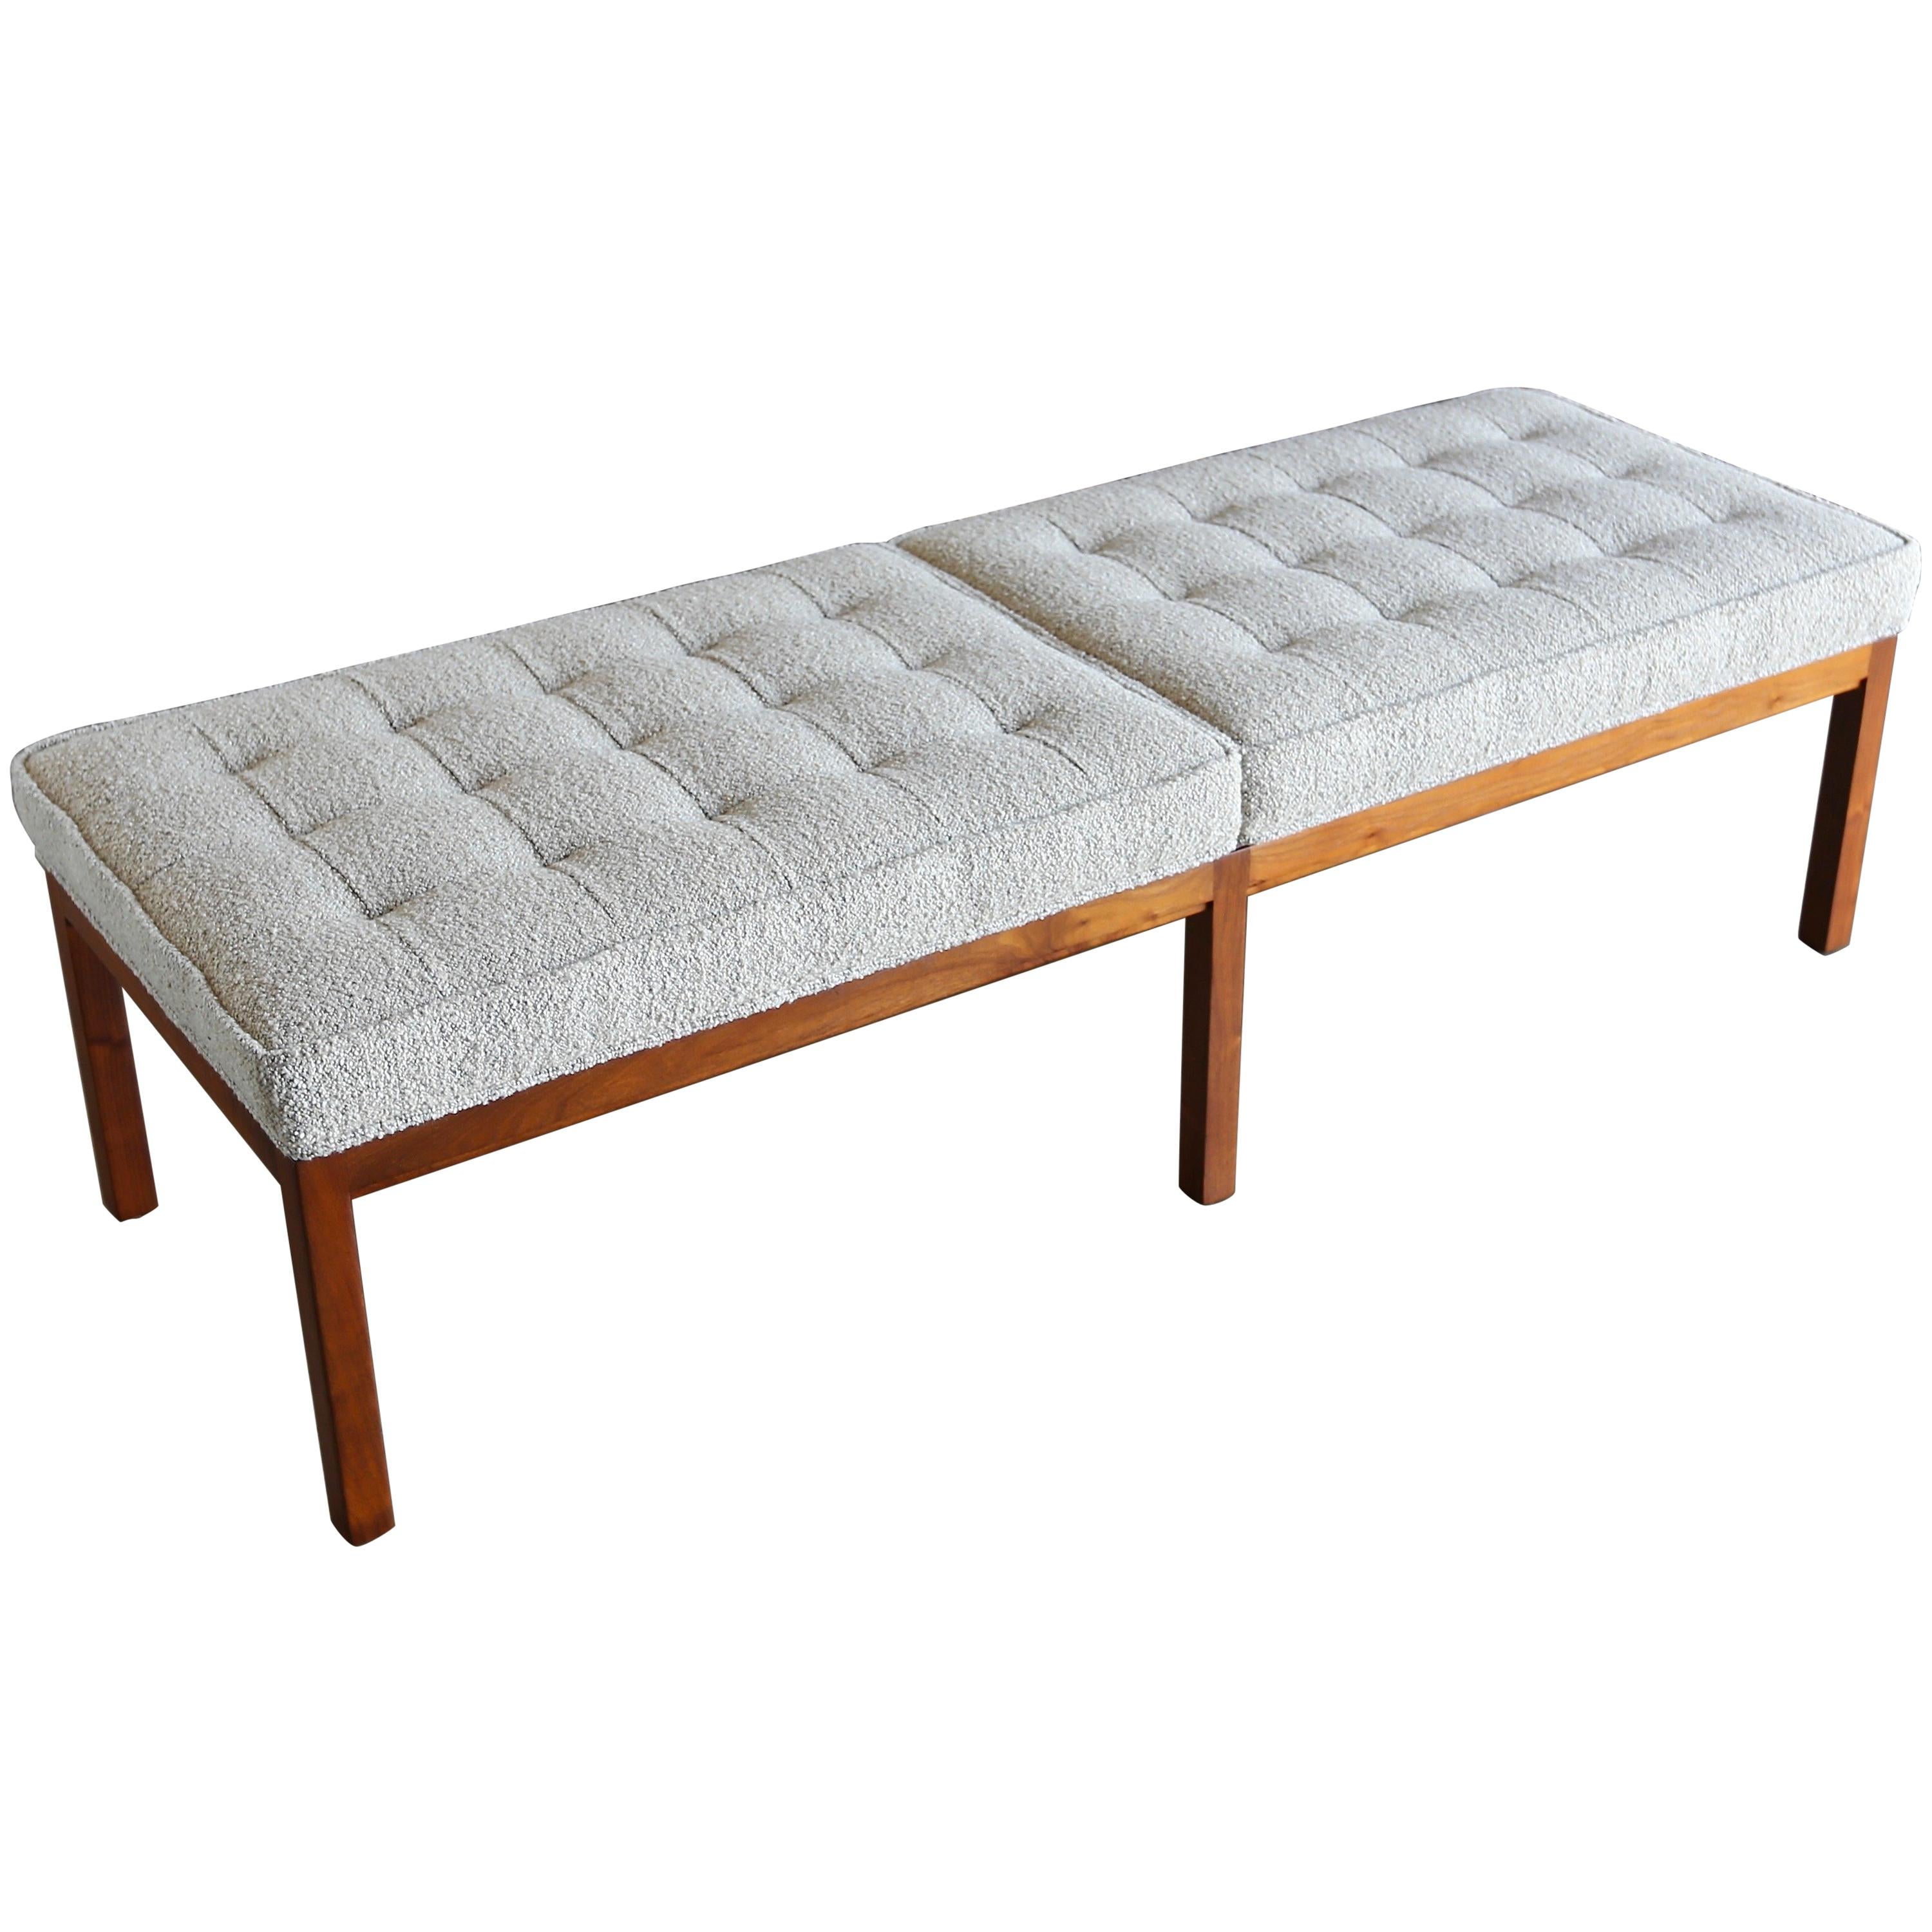 Tufted Nubby Fabric and Walnut Bench by Metropolitan Furniture Co.